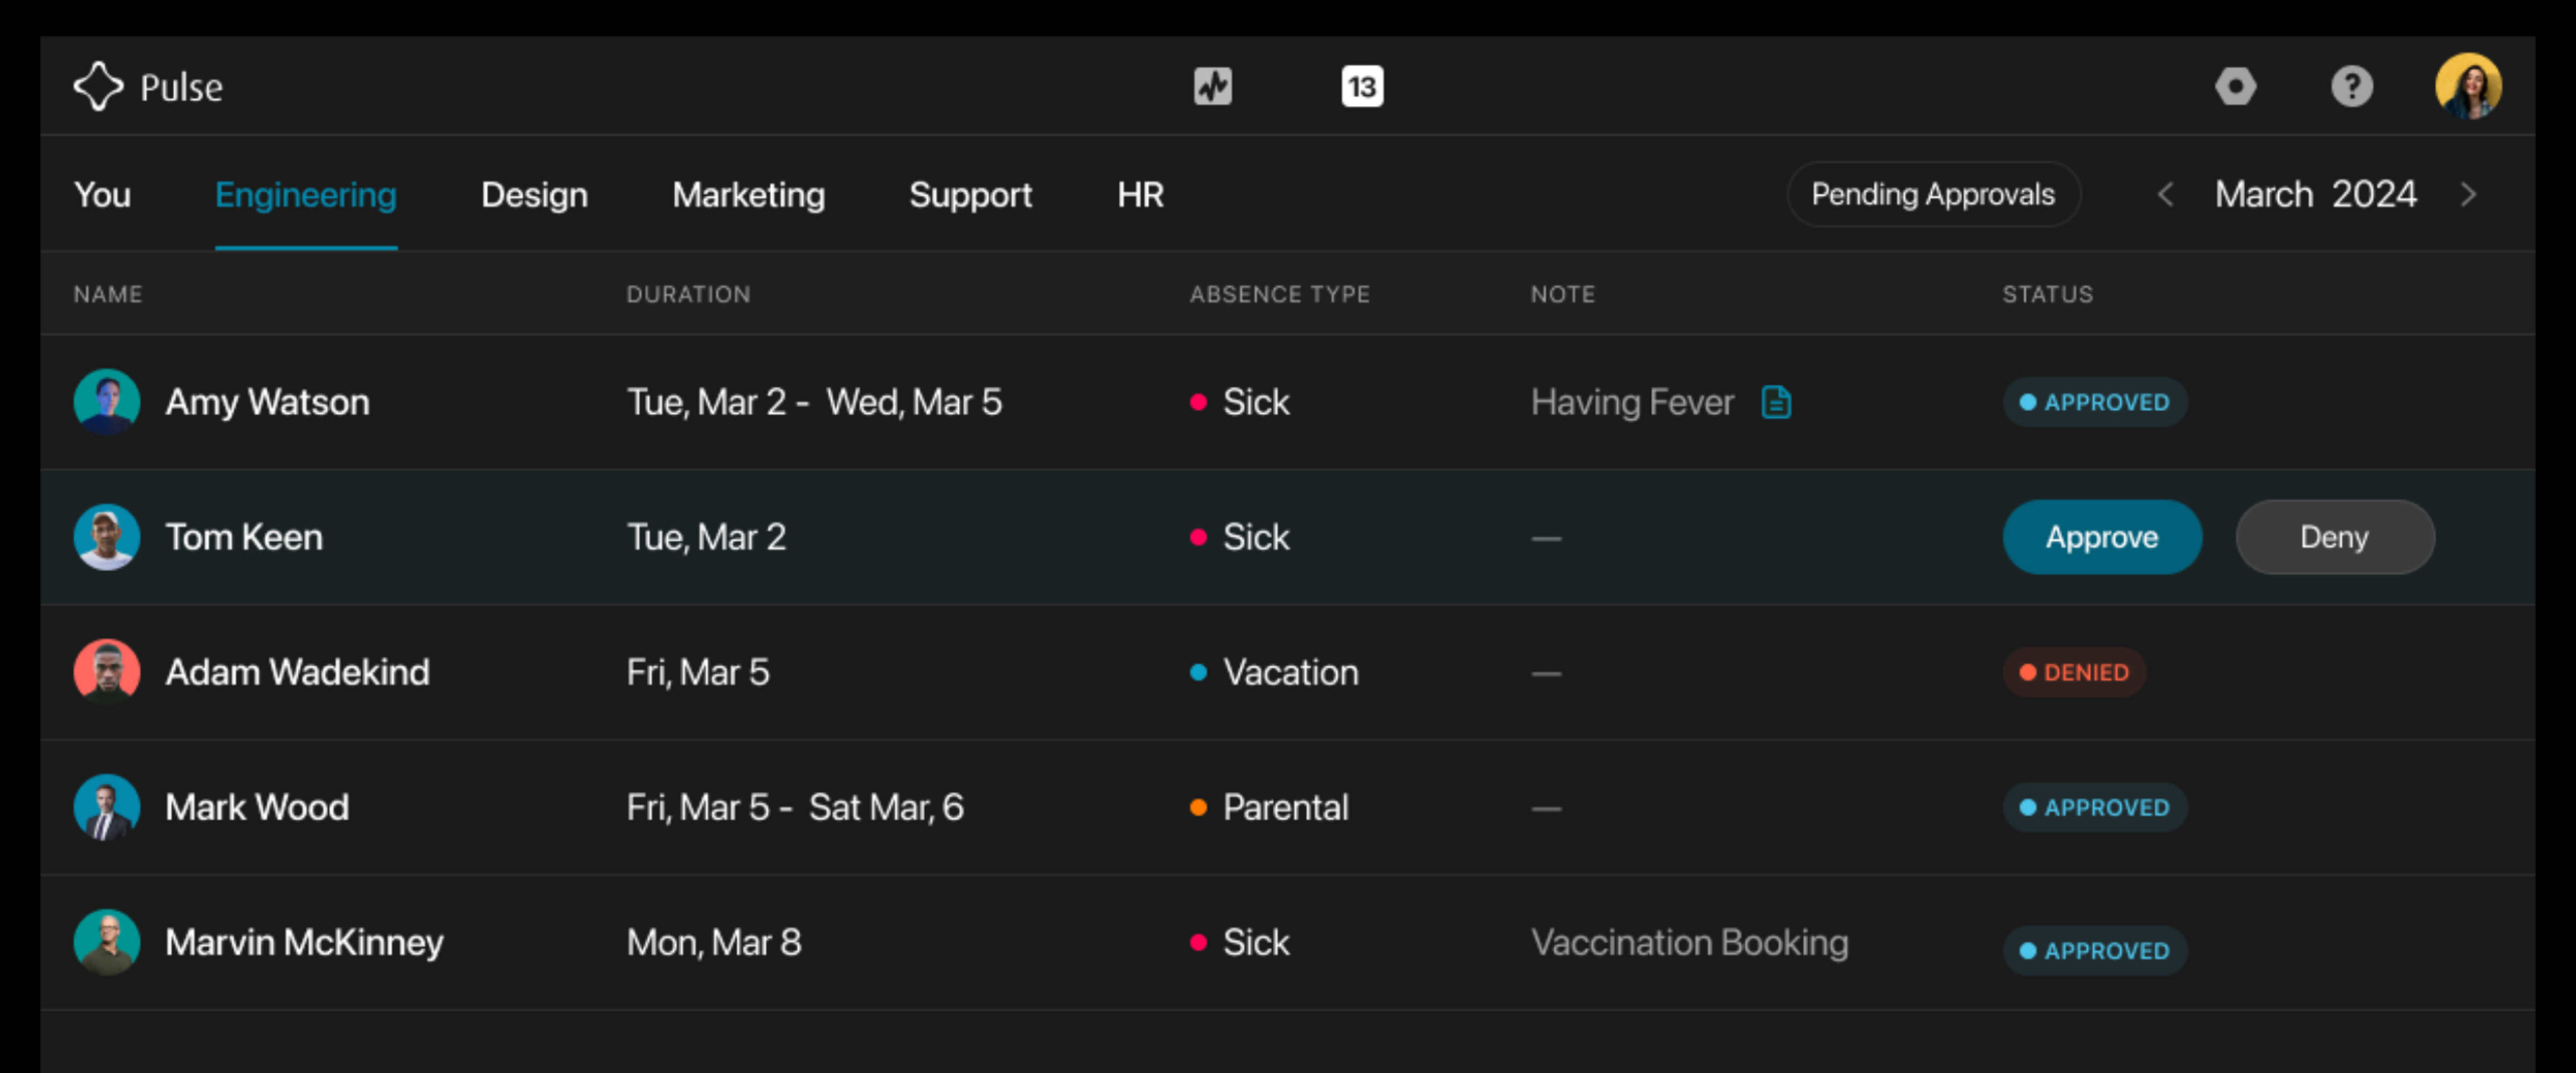 Pulse’s leave management dashboard displaying a list of leave requests from the Engineering team, with details such as name, duration, type of leave, and notes. Tom Keen’s request is awaiting approval, with options to 'Approve' or 'Deny'.